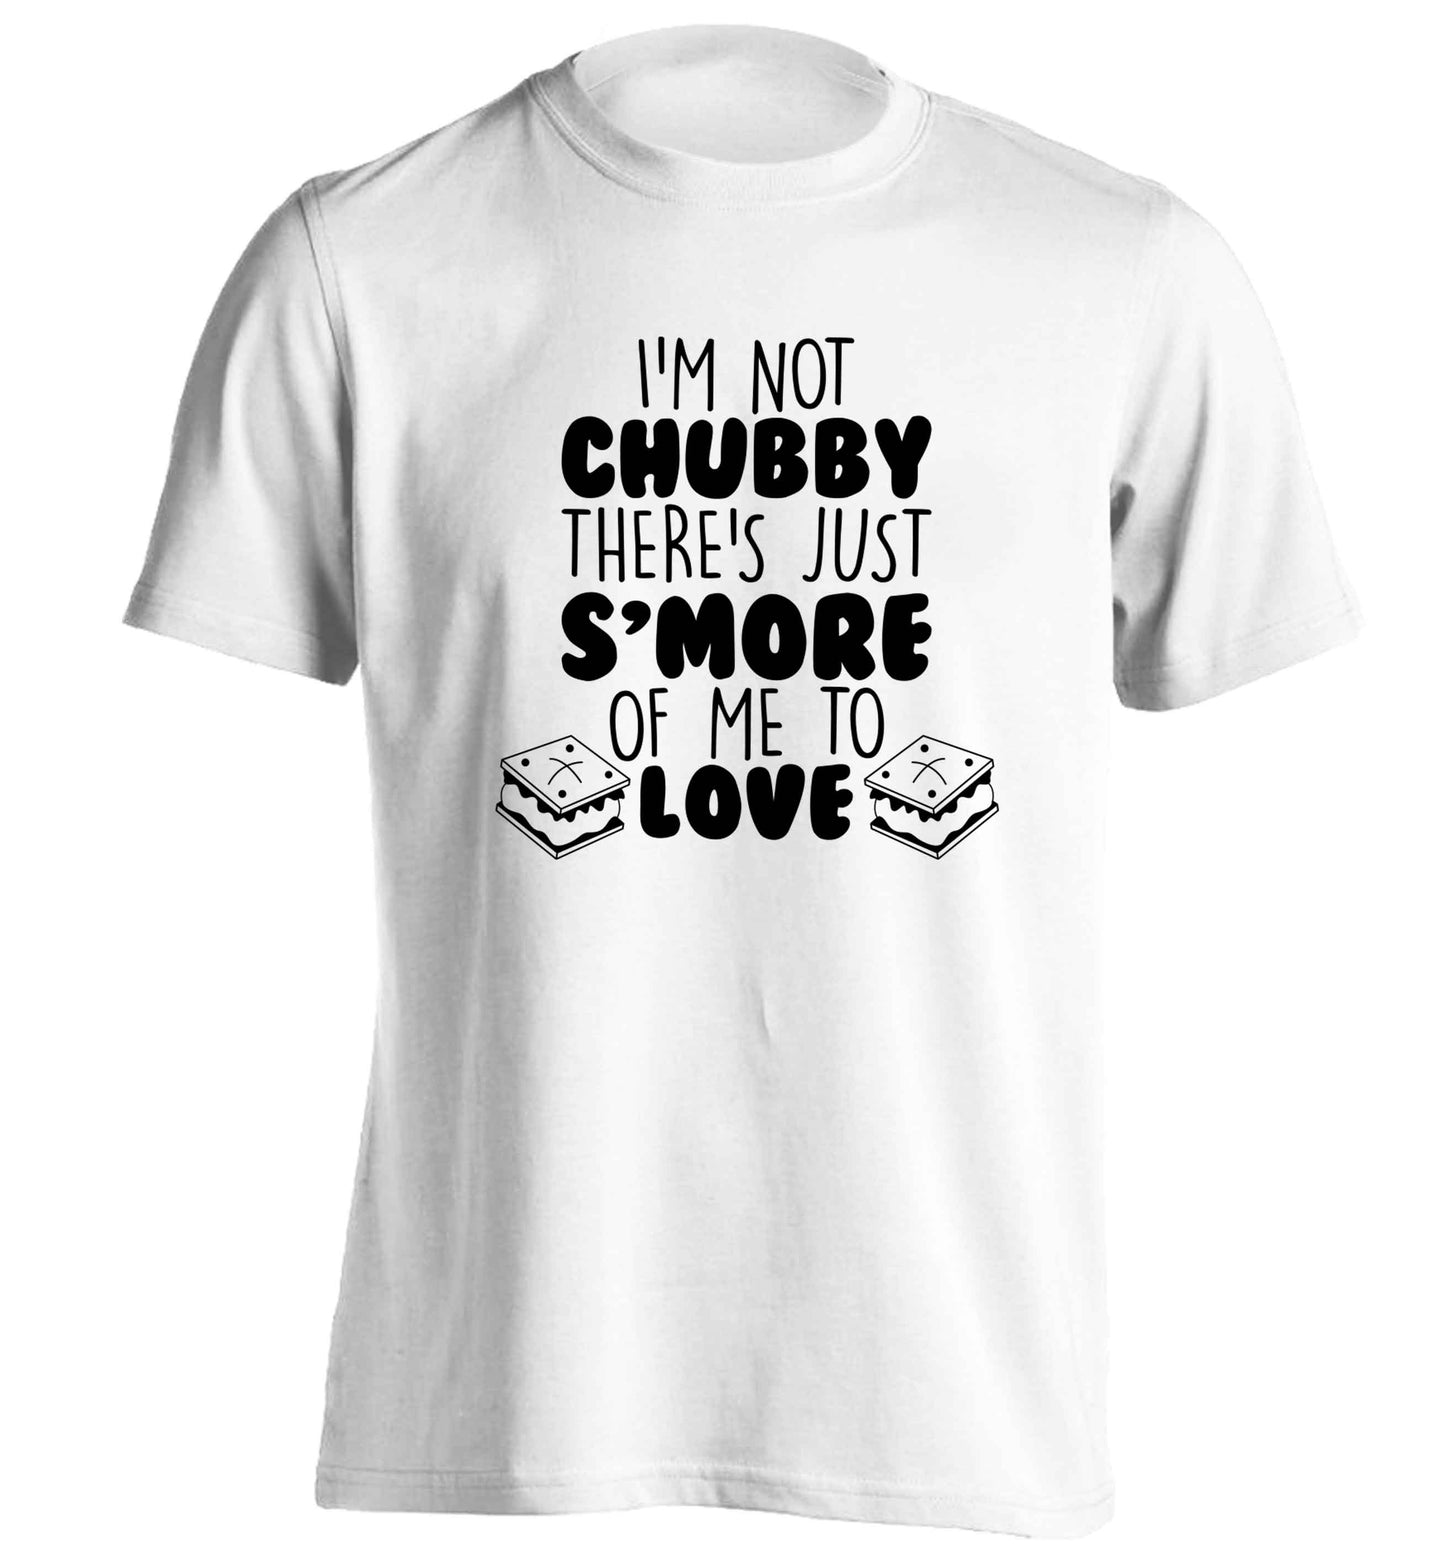 I'm not chubby there's just s'more of me to love adults unisex white Tshirt 2XL